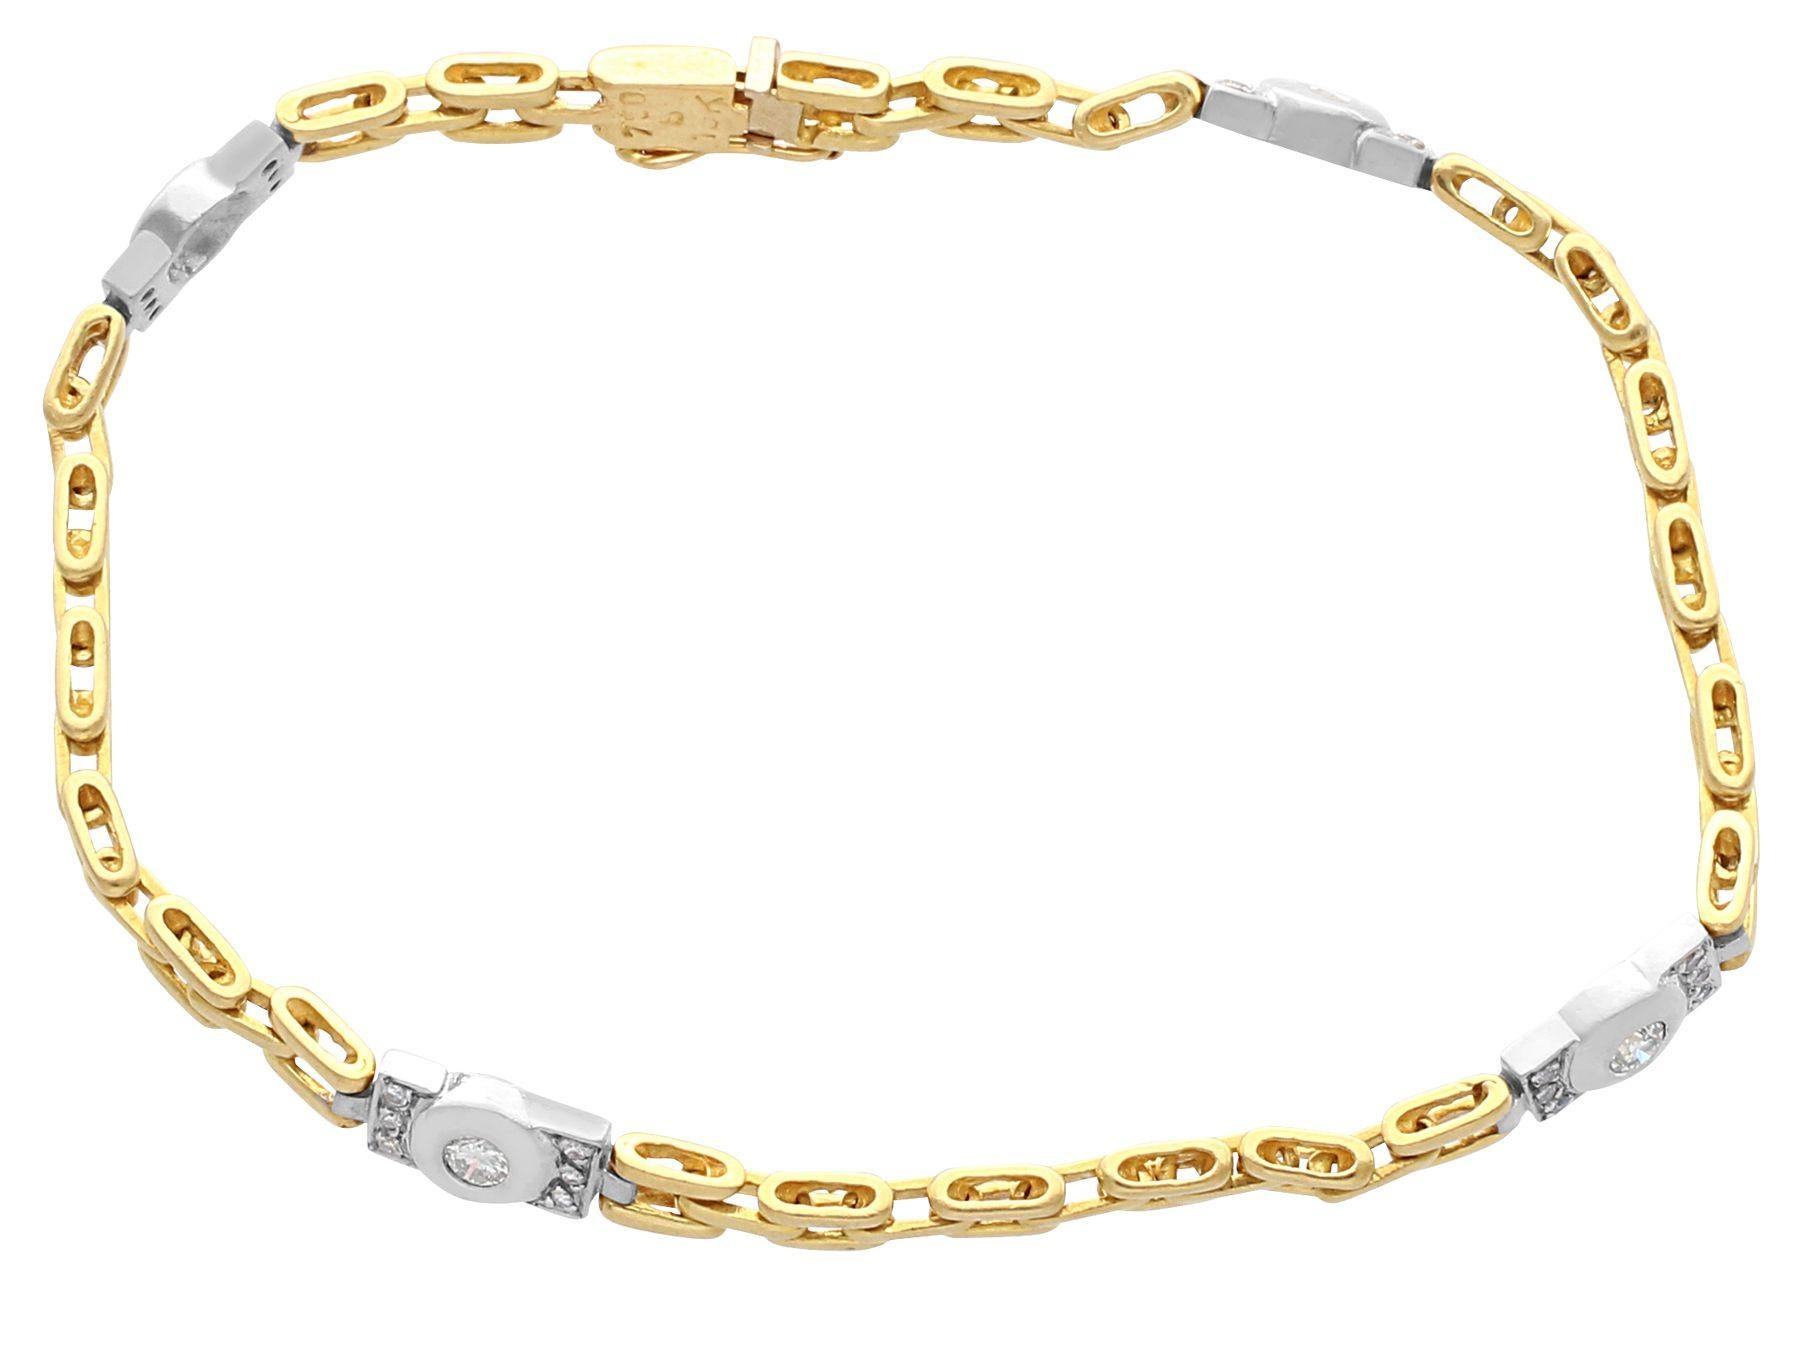 A fine and impressive vintage 0.60 carat diamond and 18 karat yellow gold, 18 karat white gold set bracelet; part of our diverse diamond jewelry collection.

This fine and impressive diamond bracelet has been crafted in 18k yellow gold.

The fancy